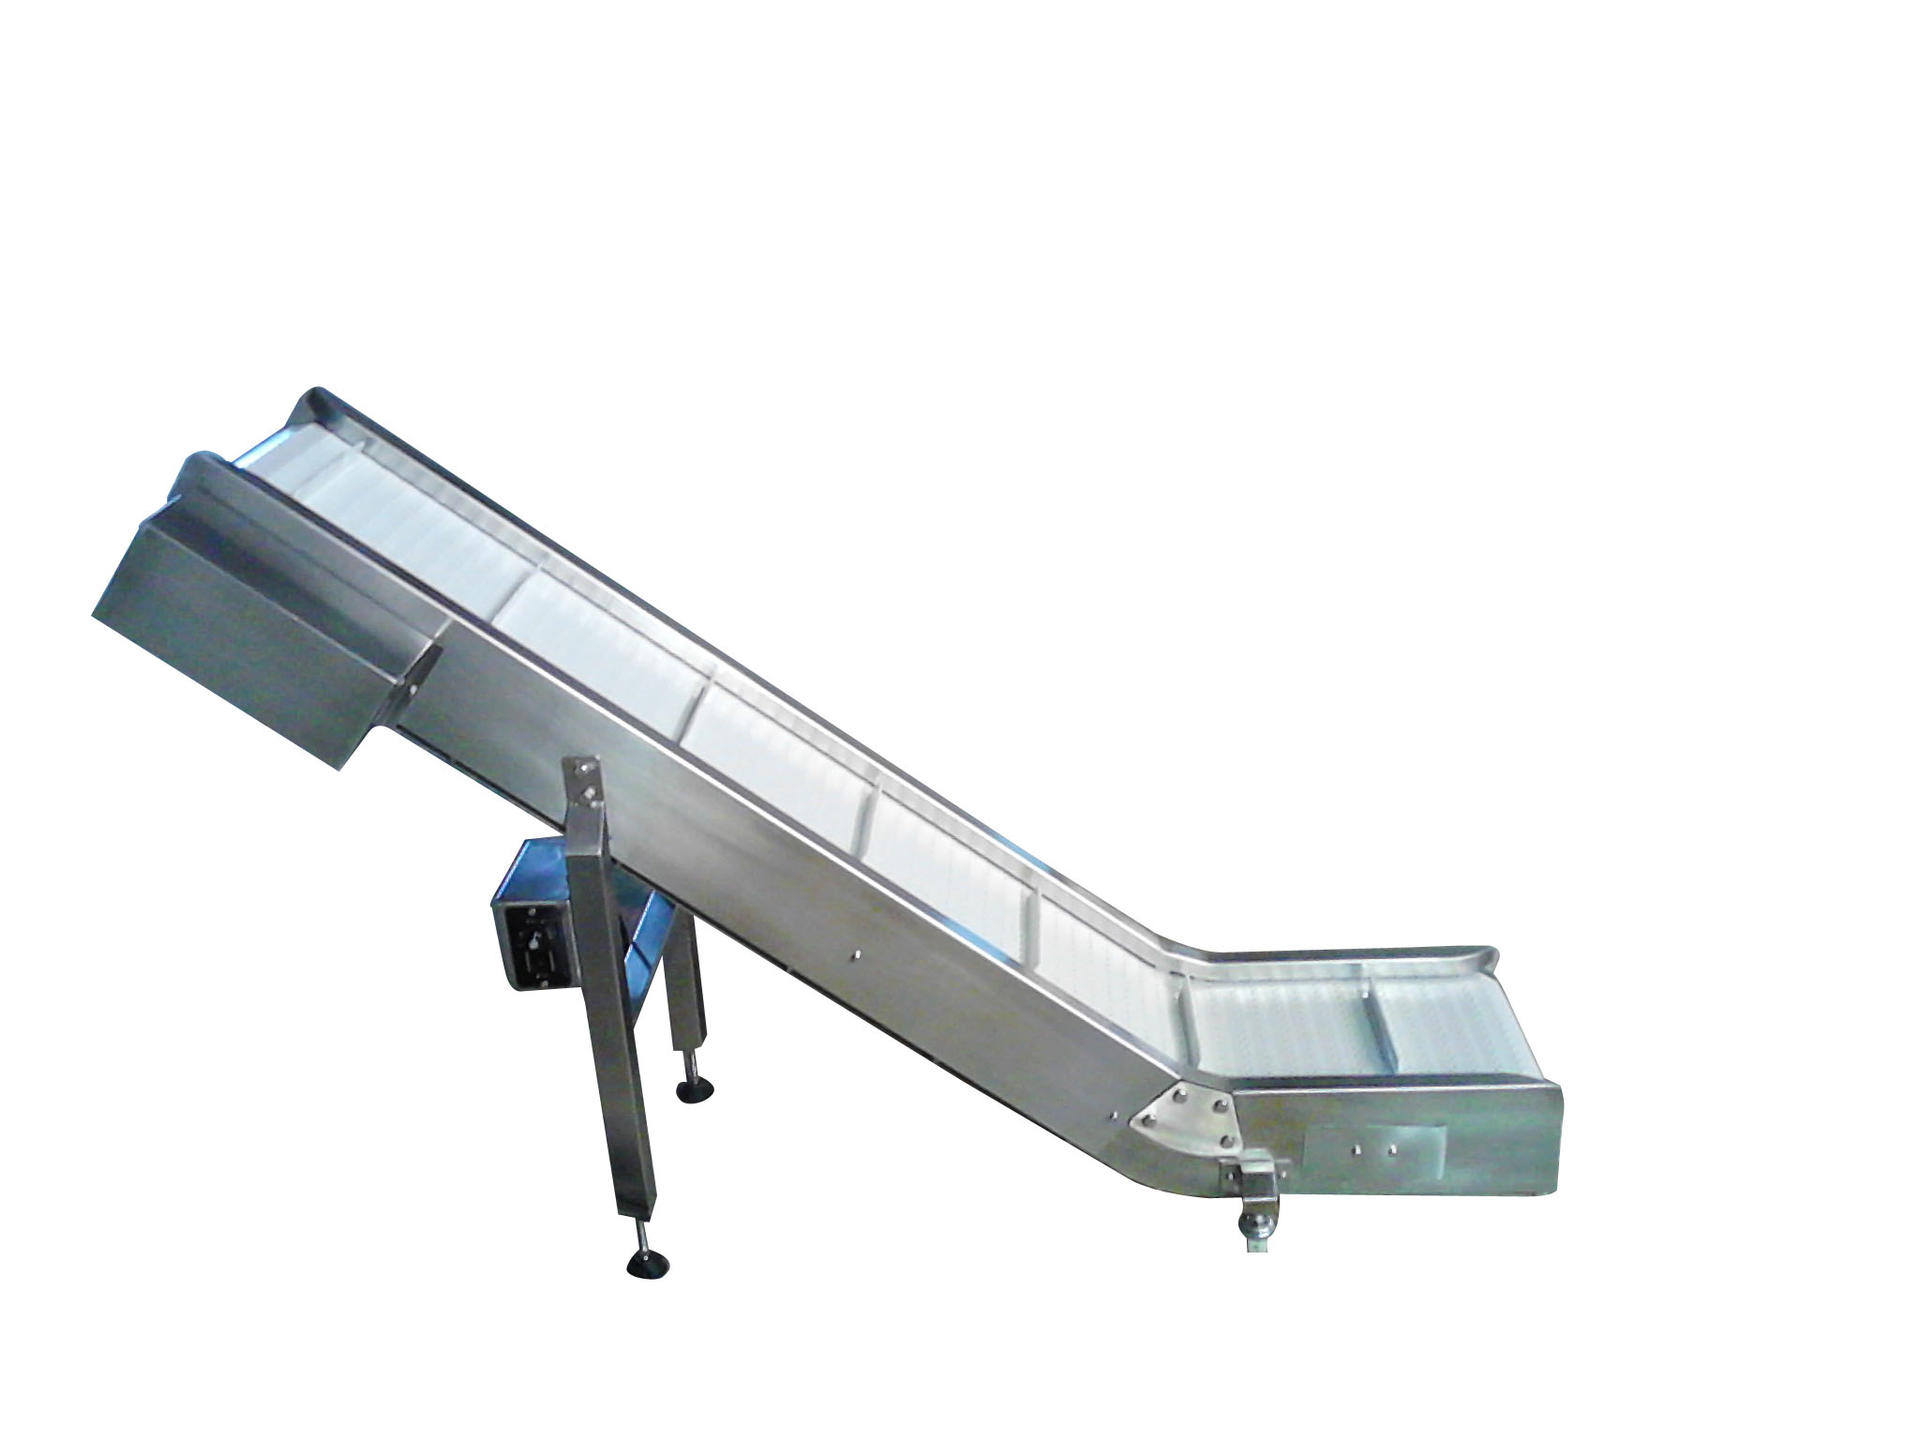 2020 New products on market dried vegetable packaging machine